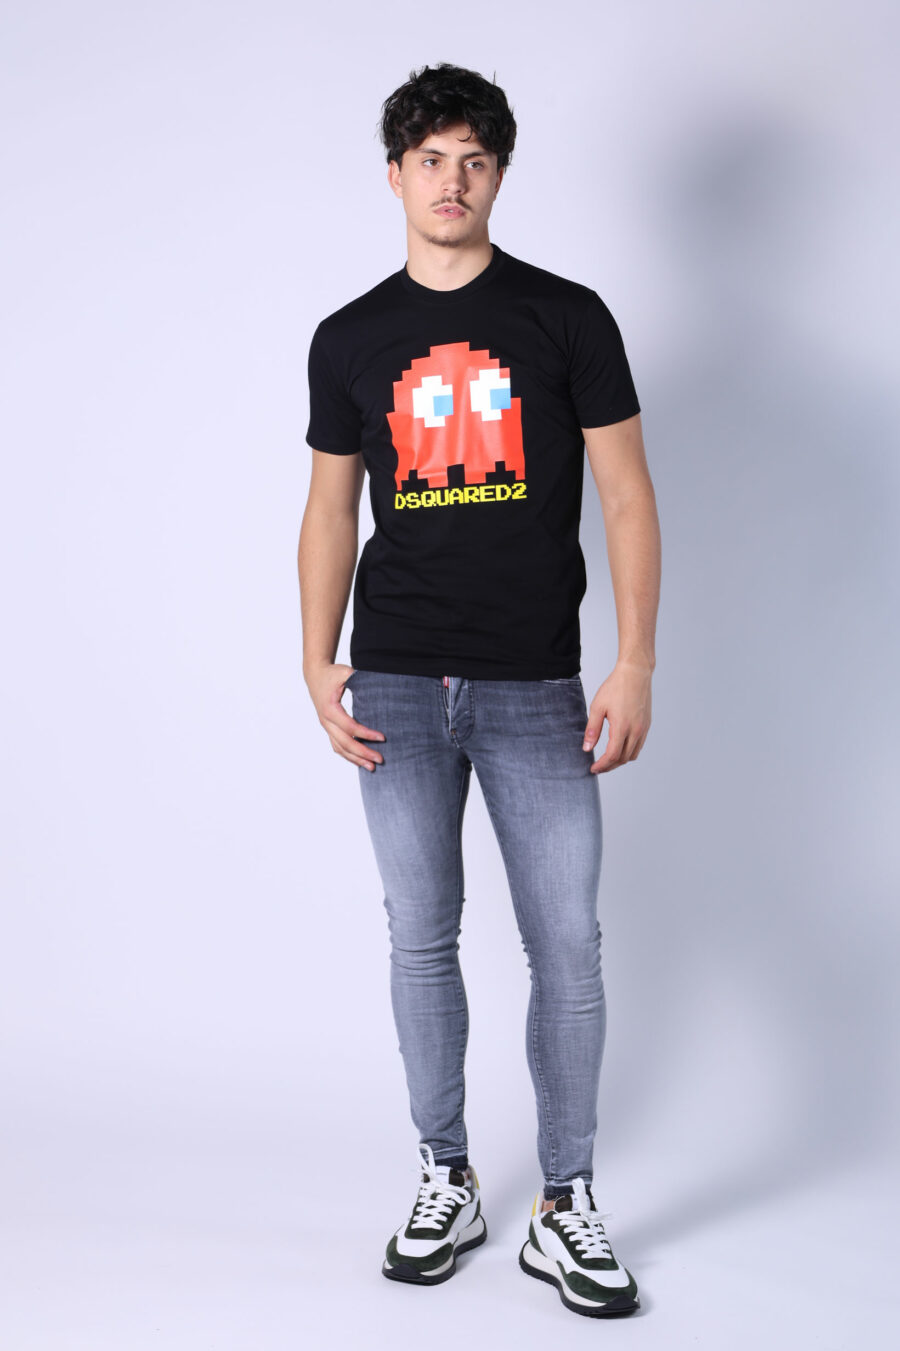 Black t-shirt with "pac-man" ghost maxi logo - Untitled Catalog 05635